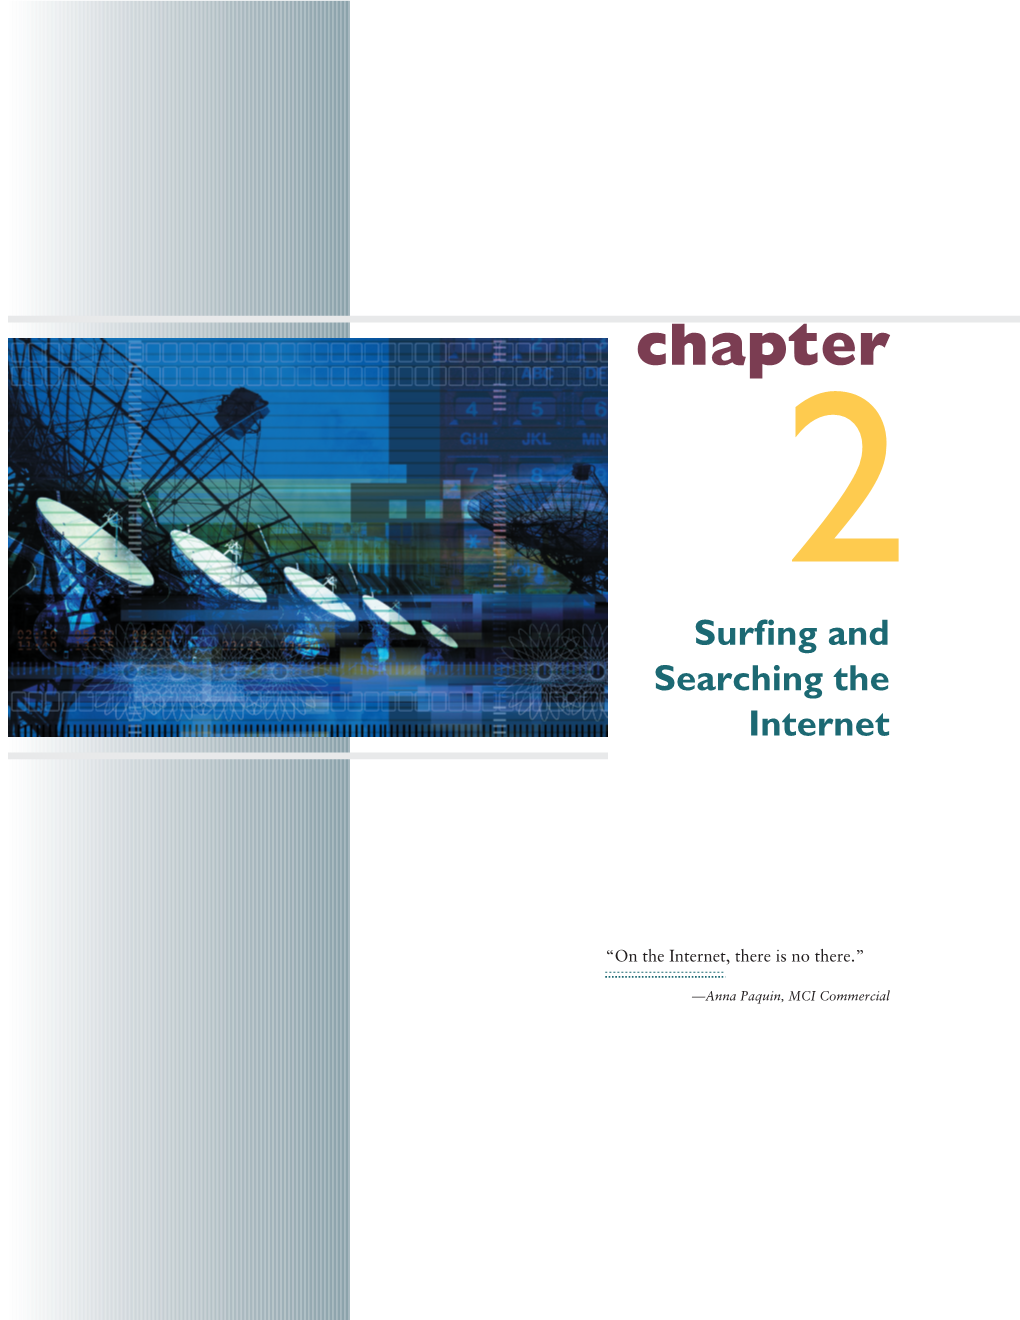 Chapter 2 Surfing and Searching the Internet